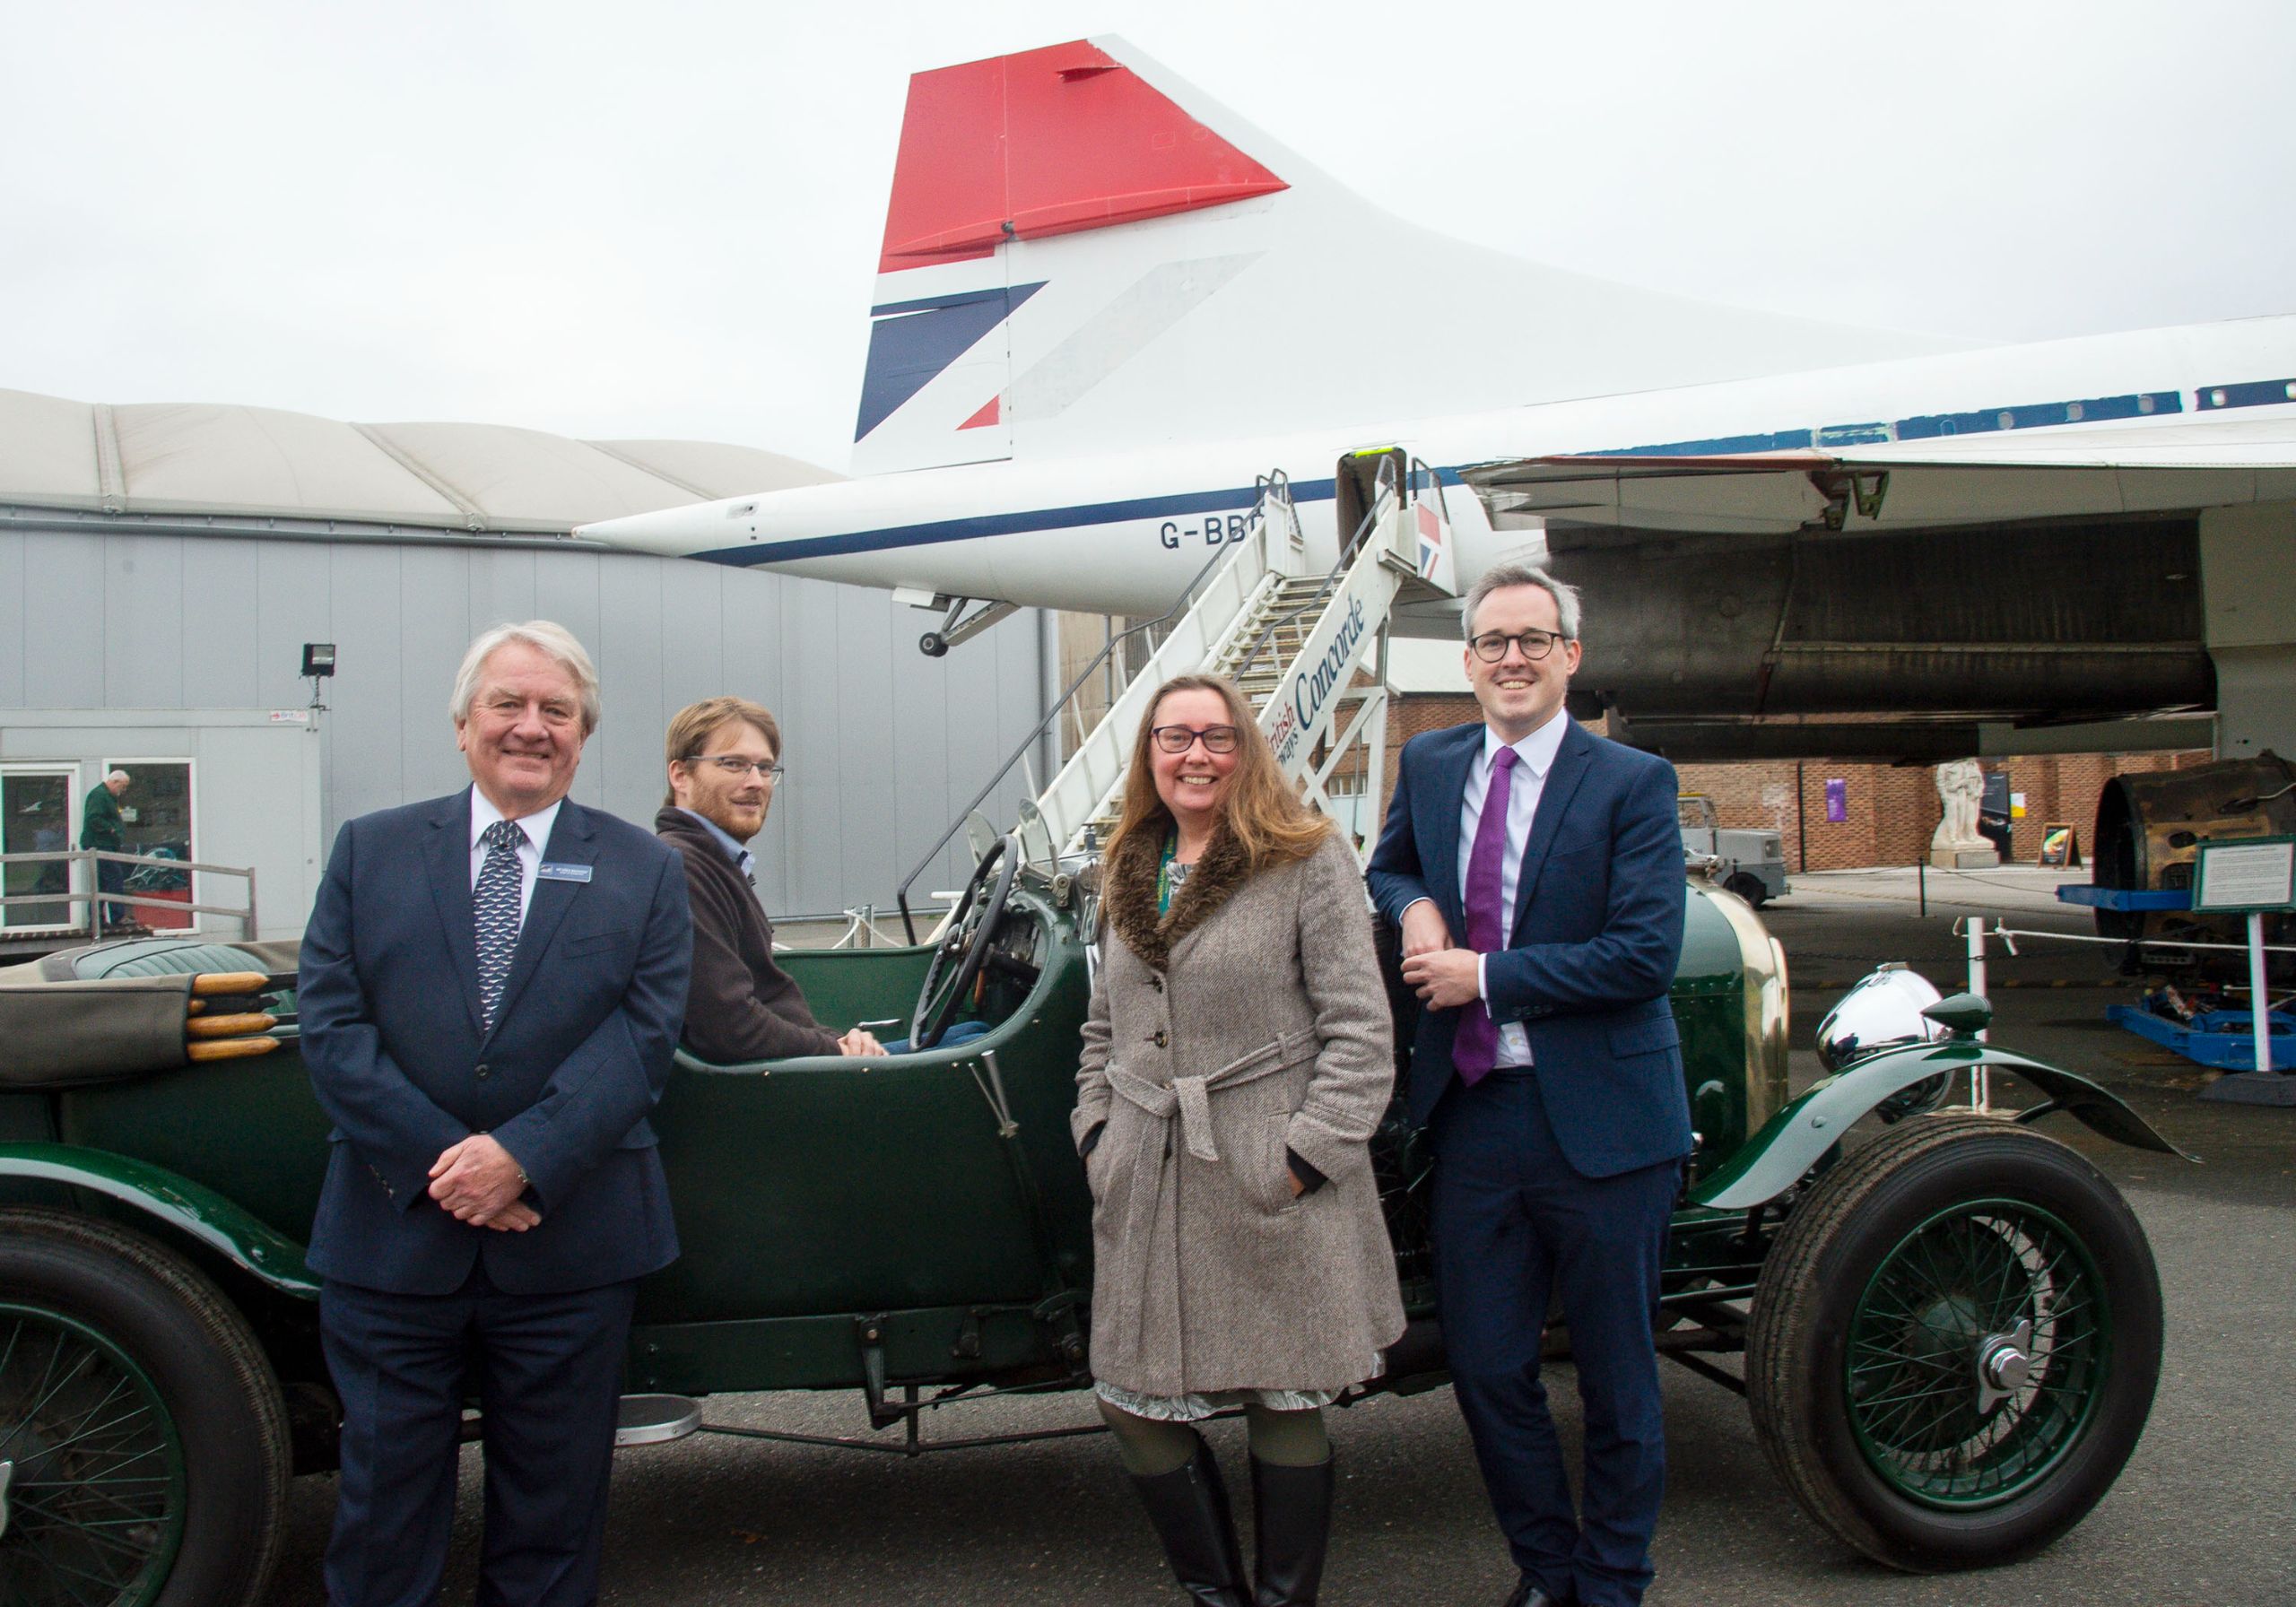 Lord Parkinson with CEO Tamalie Newbery and Captain Mike Bannister in front of Concorde